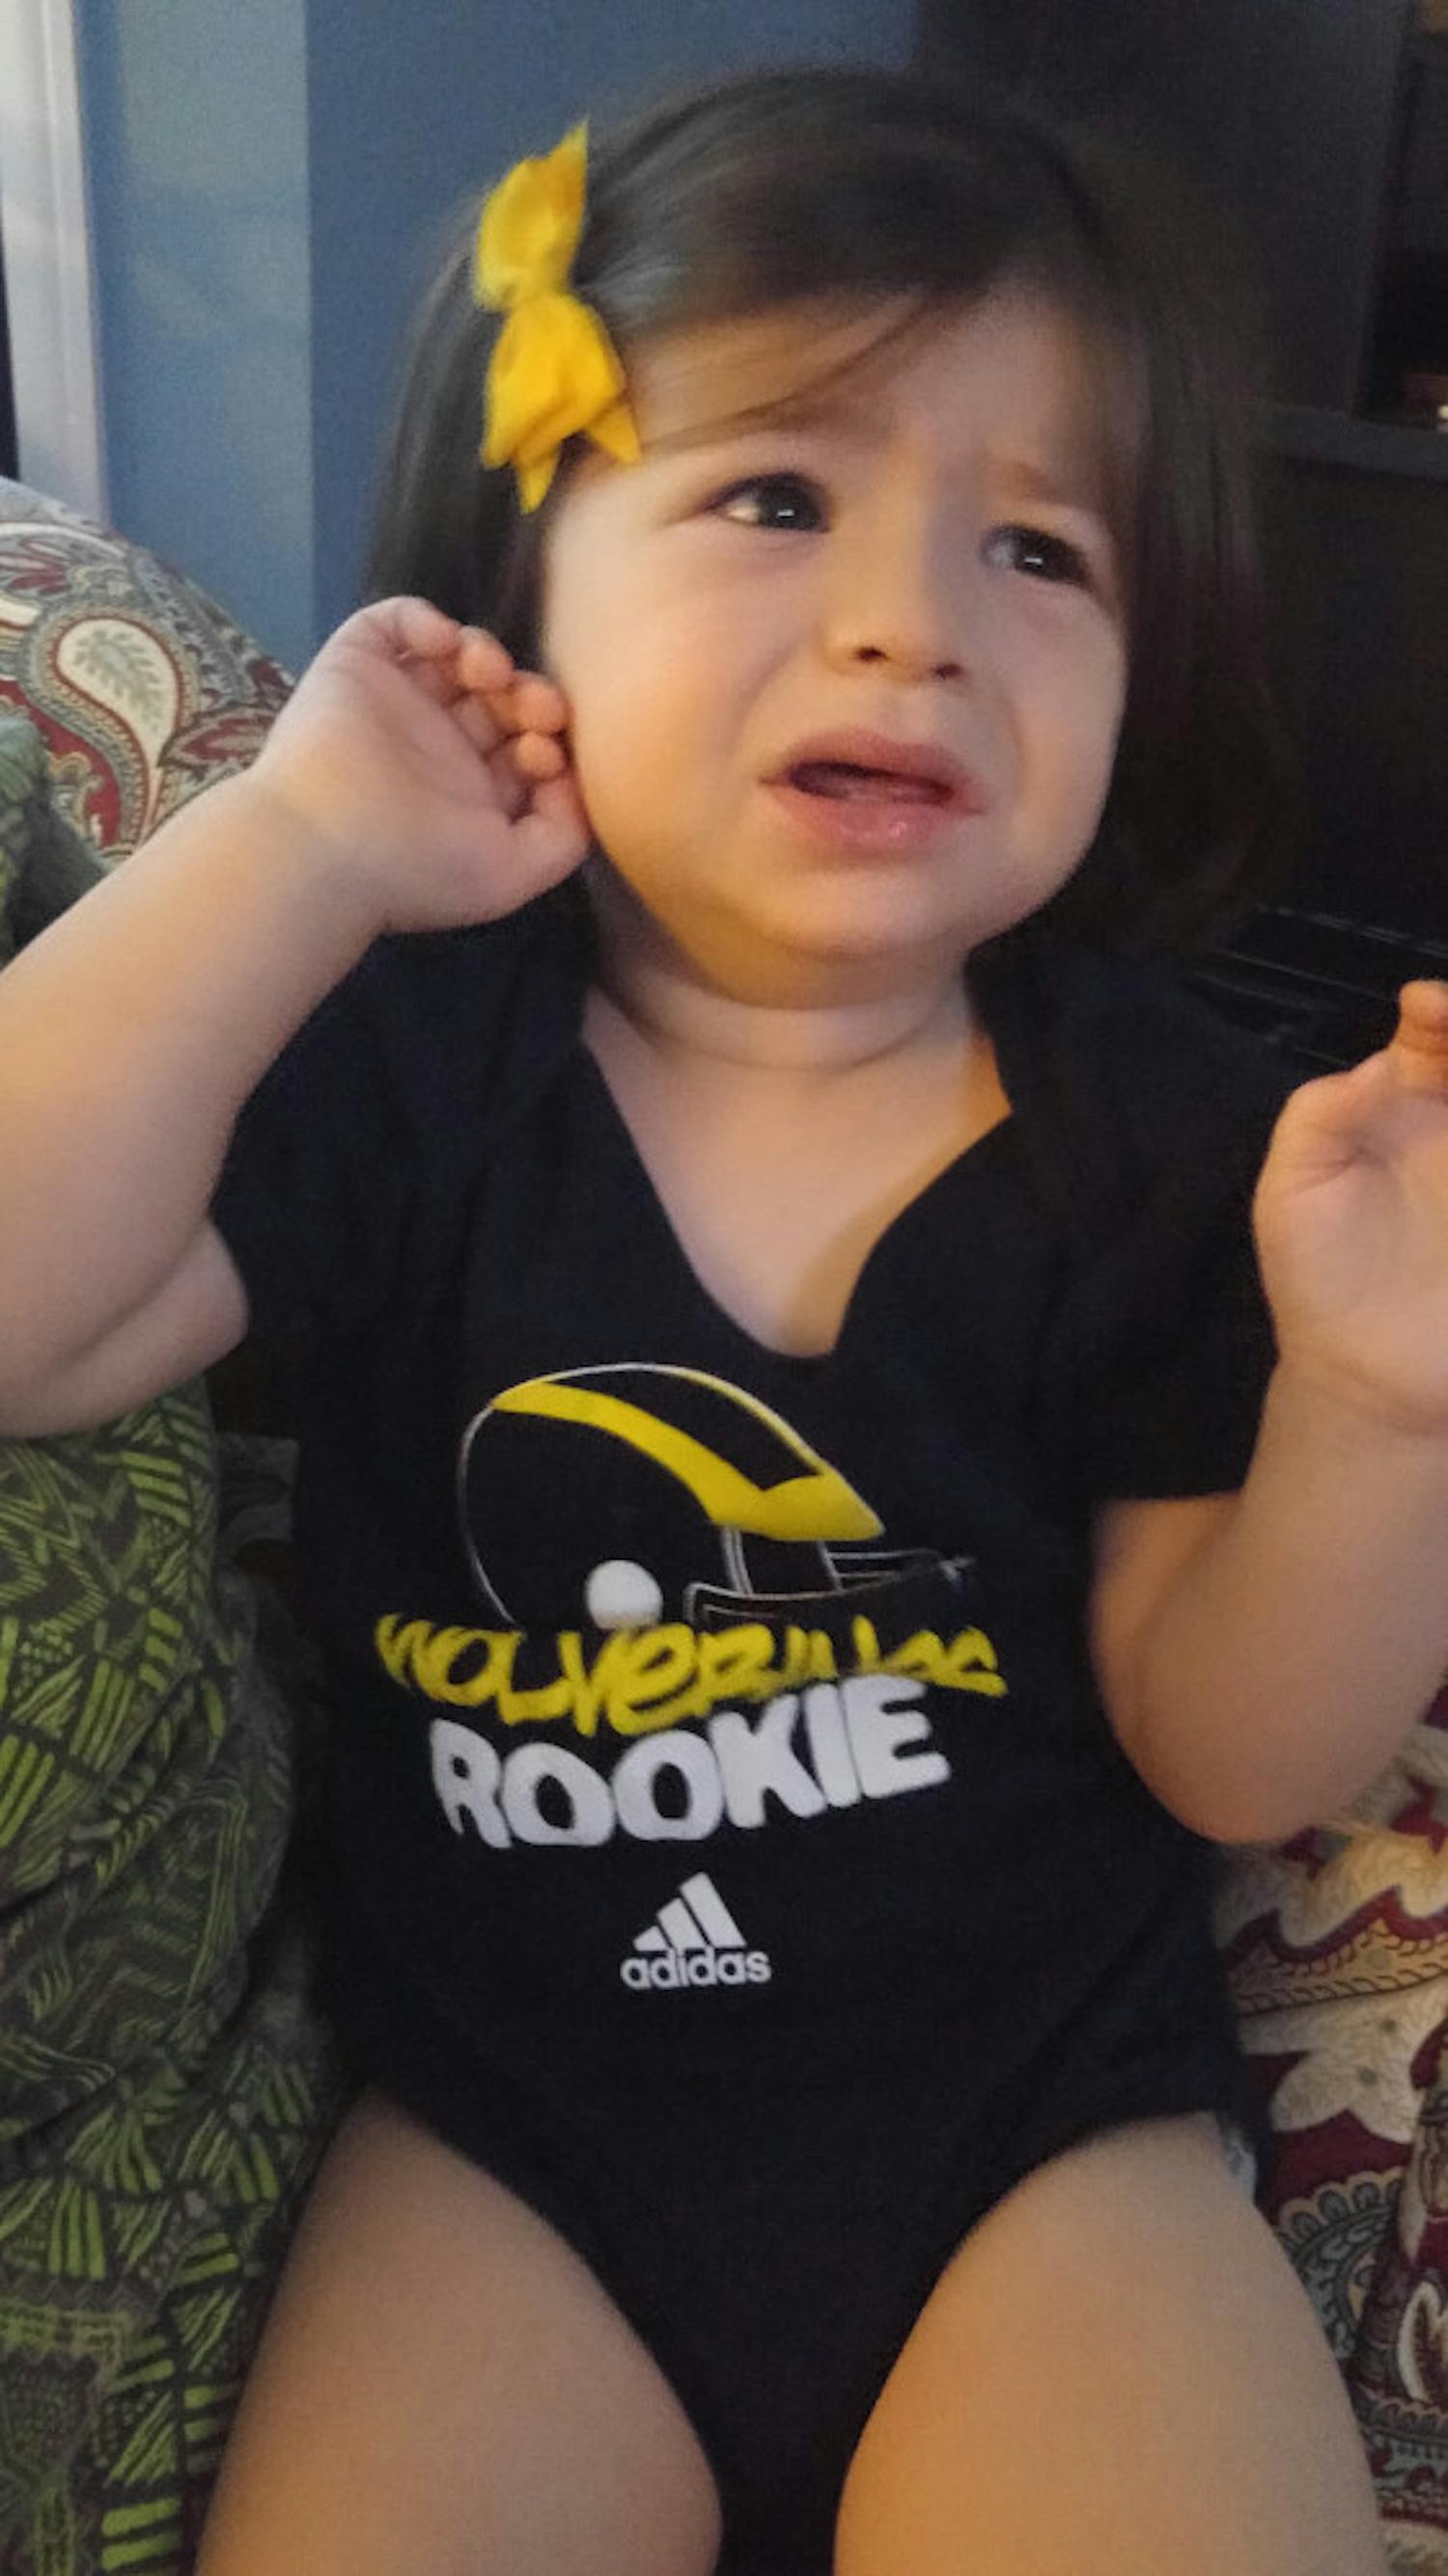 Lily, the daughter of tormented Gator fan Daniel Stone, offers an uncomfortable expression while wearing Michigan apparel.